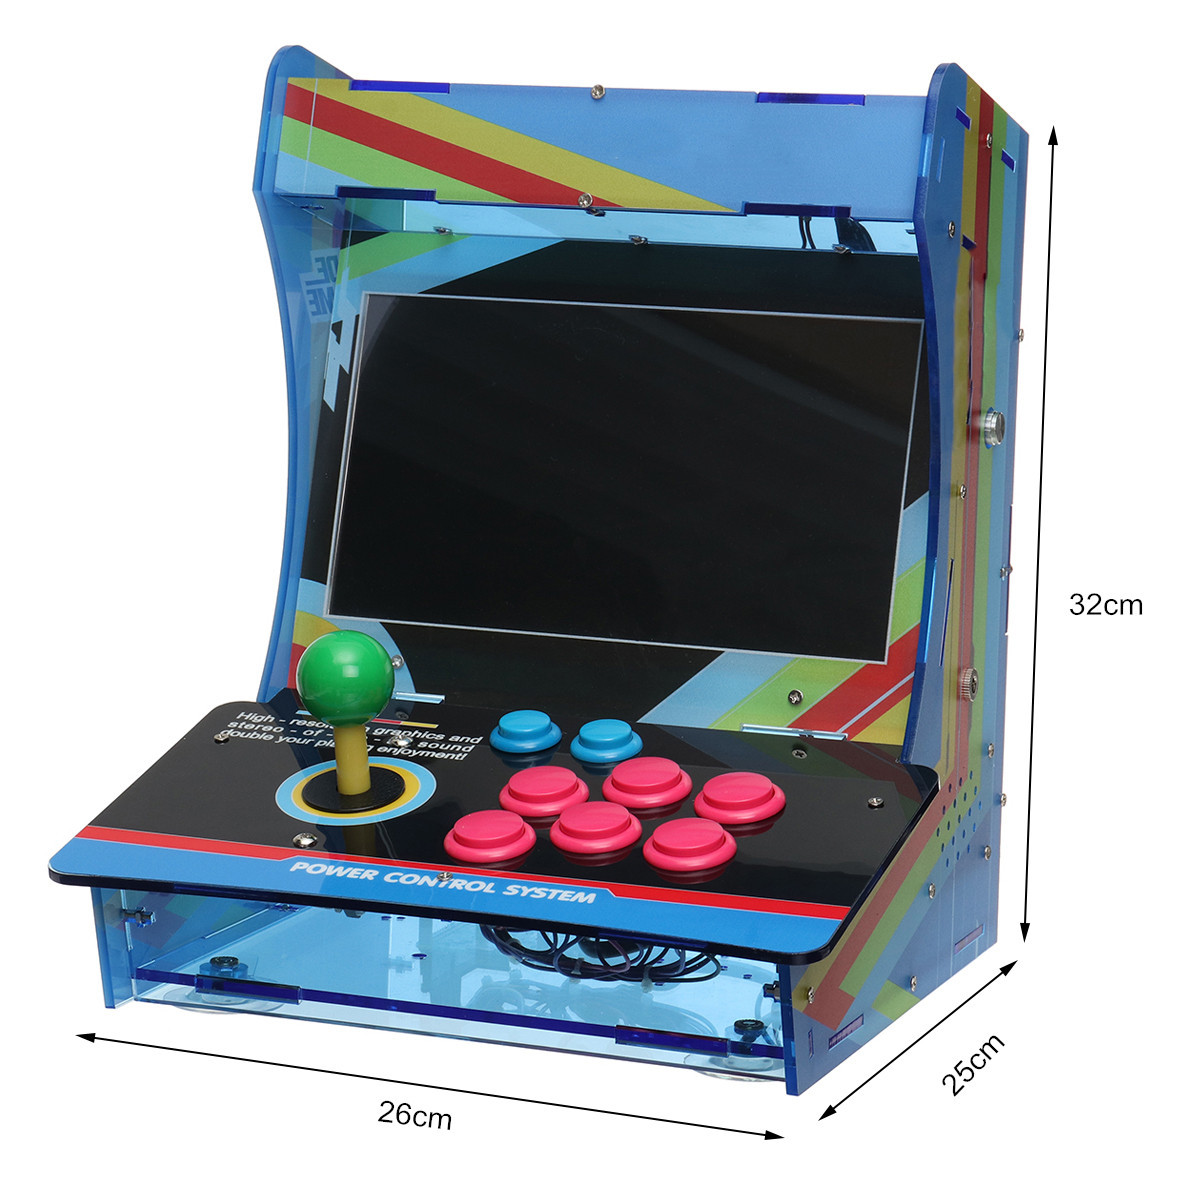 Raspberry Pi 3 based Retro Arcade Game Console Sells for under 250 